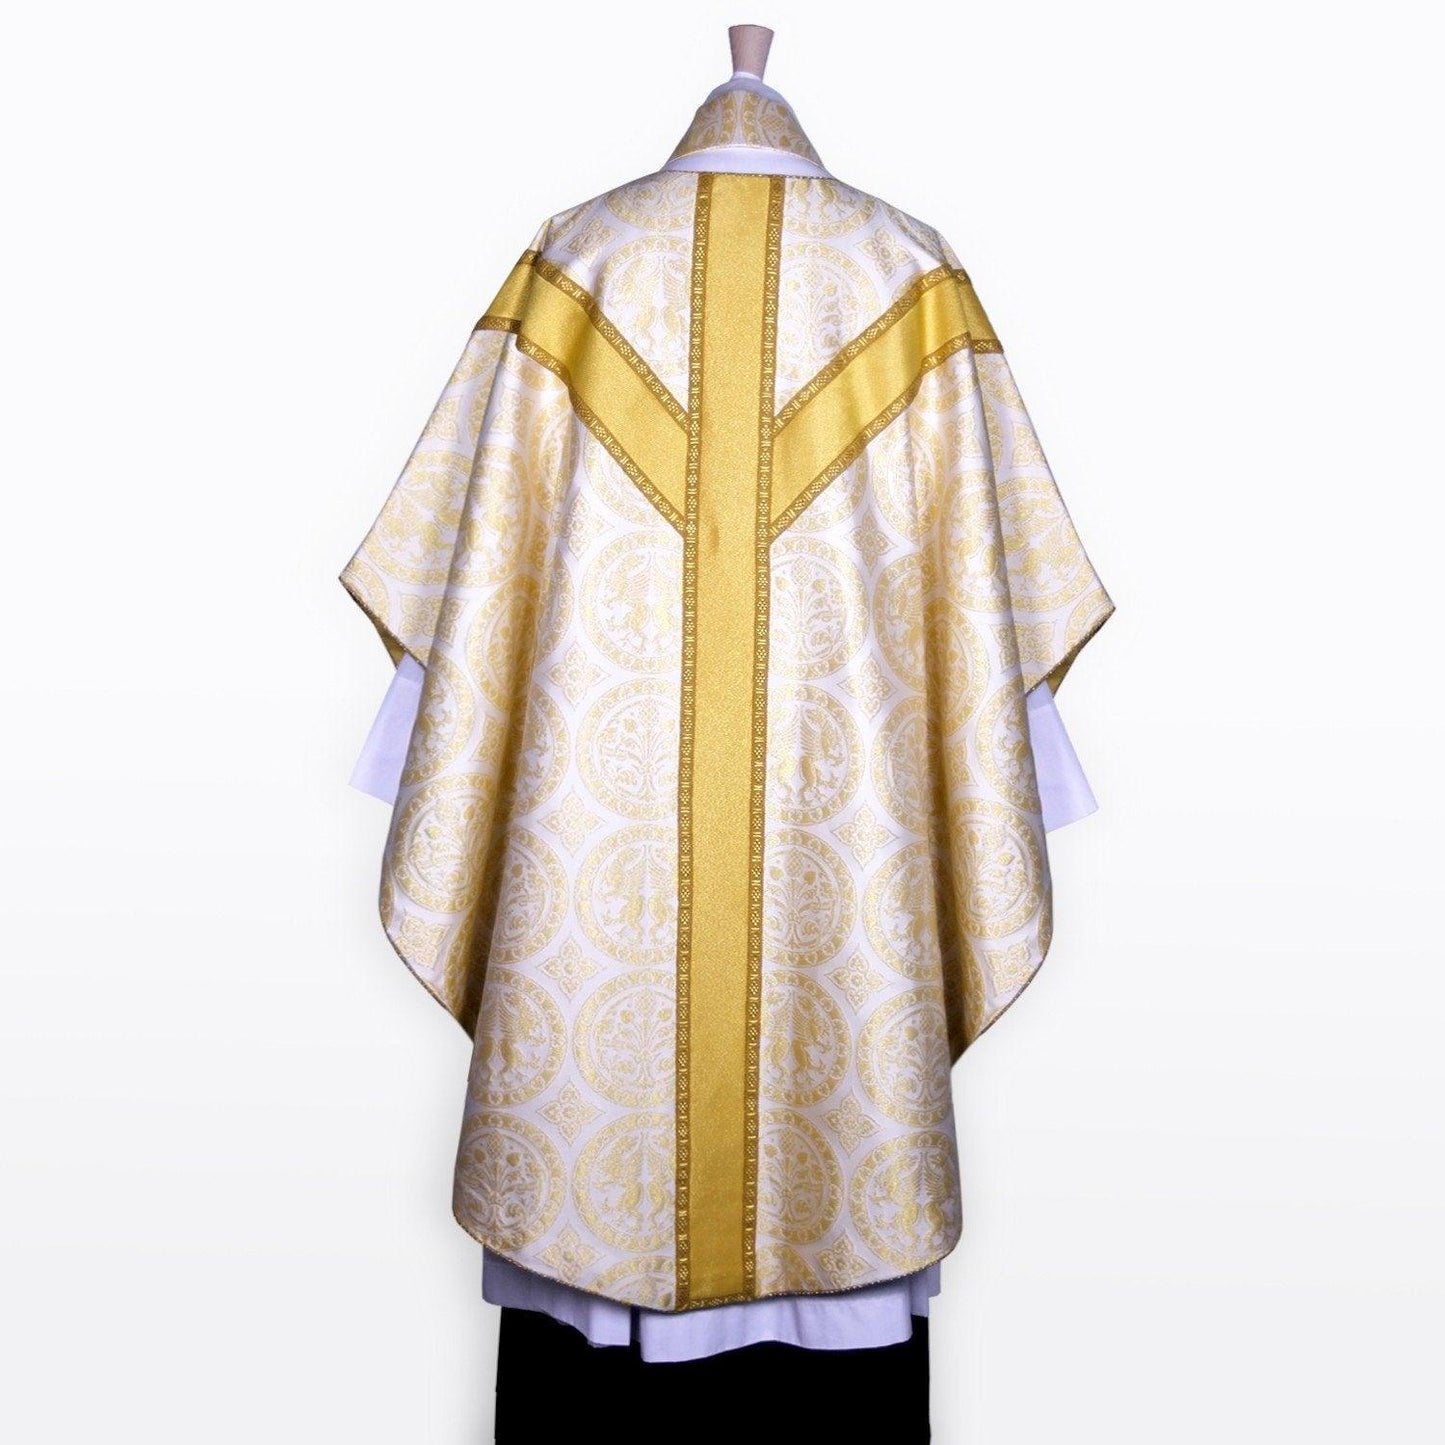 Full Gothic Chasuble in White/Gold Chalcedon - Watts & Co. (international)